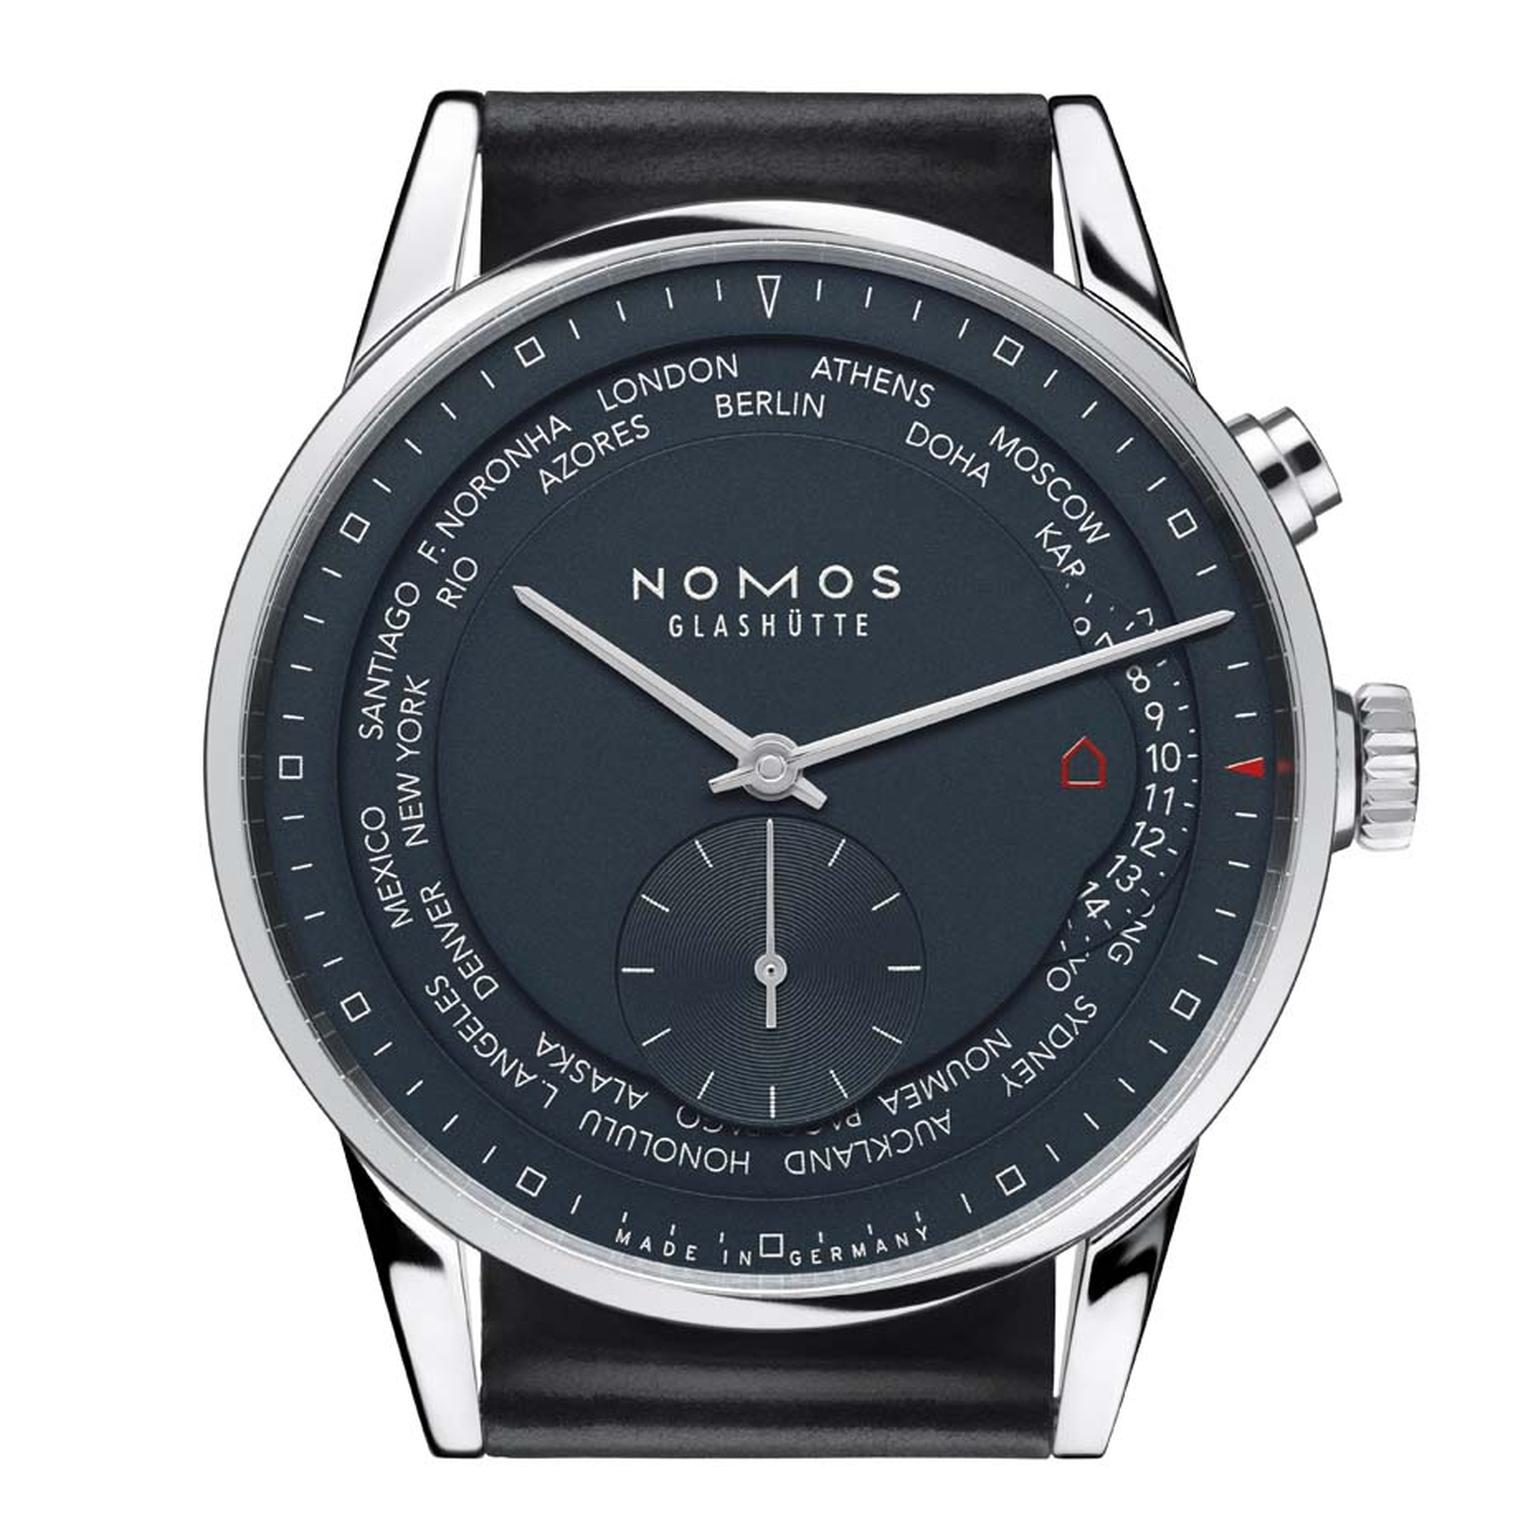 The Nomos Zurich Worldtimer Trueblue watch features 24 time zones on its dial, which can be changed by a simple click. The 39.9mm stainless steel case houses Nomos' innovative swing system calibre, which can be admired through the caseback (£3,850).